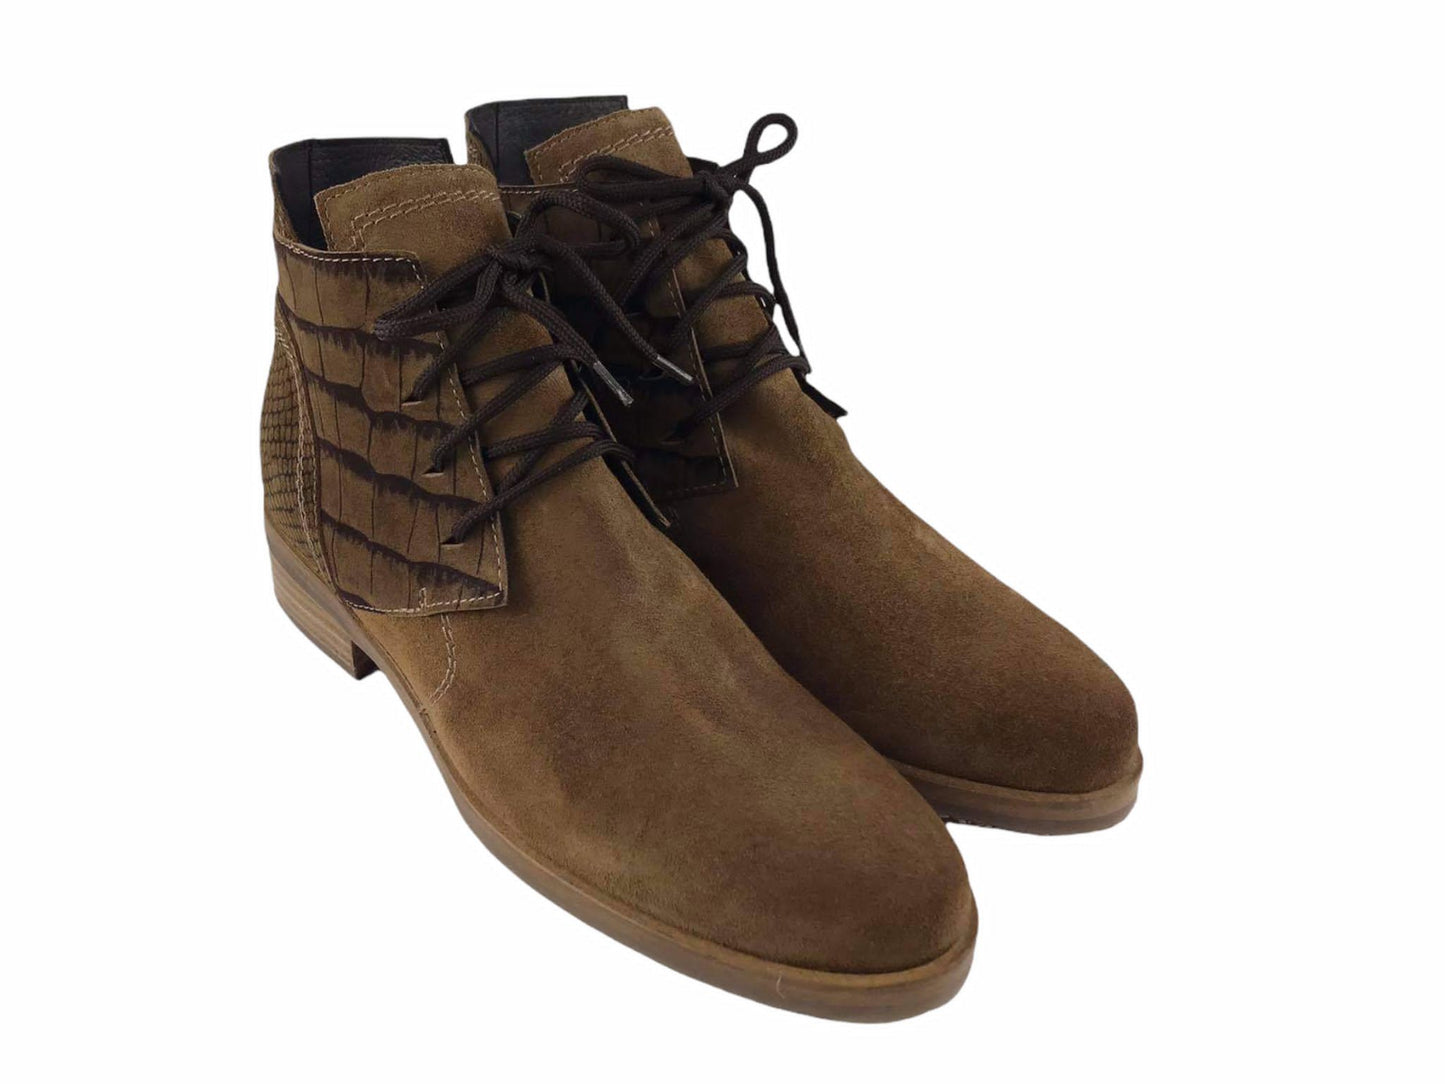 Plumers | Ibiza women's flat ankle boots, with laces, in tan suede leather